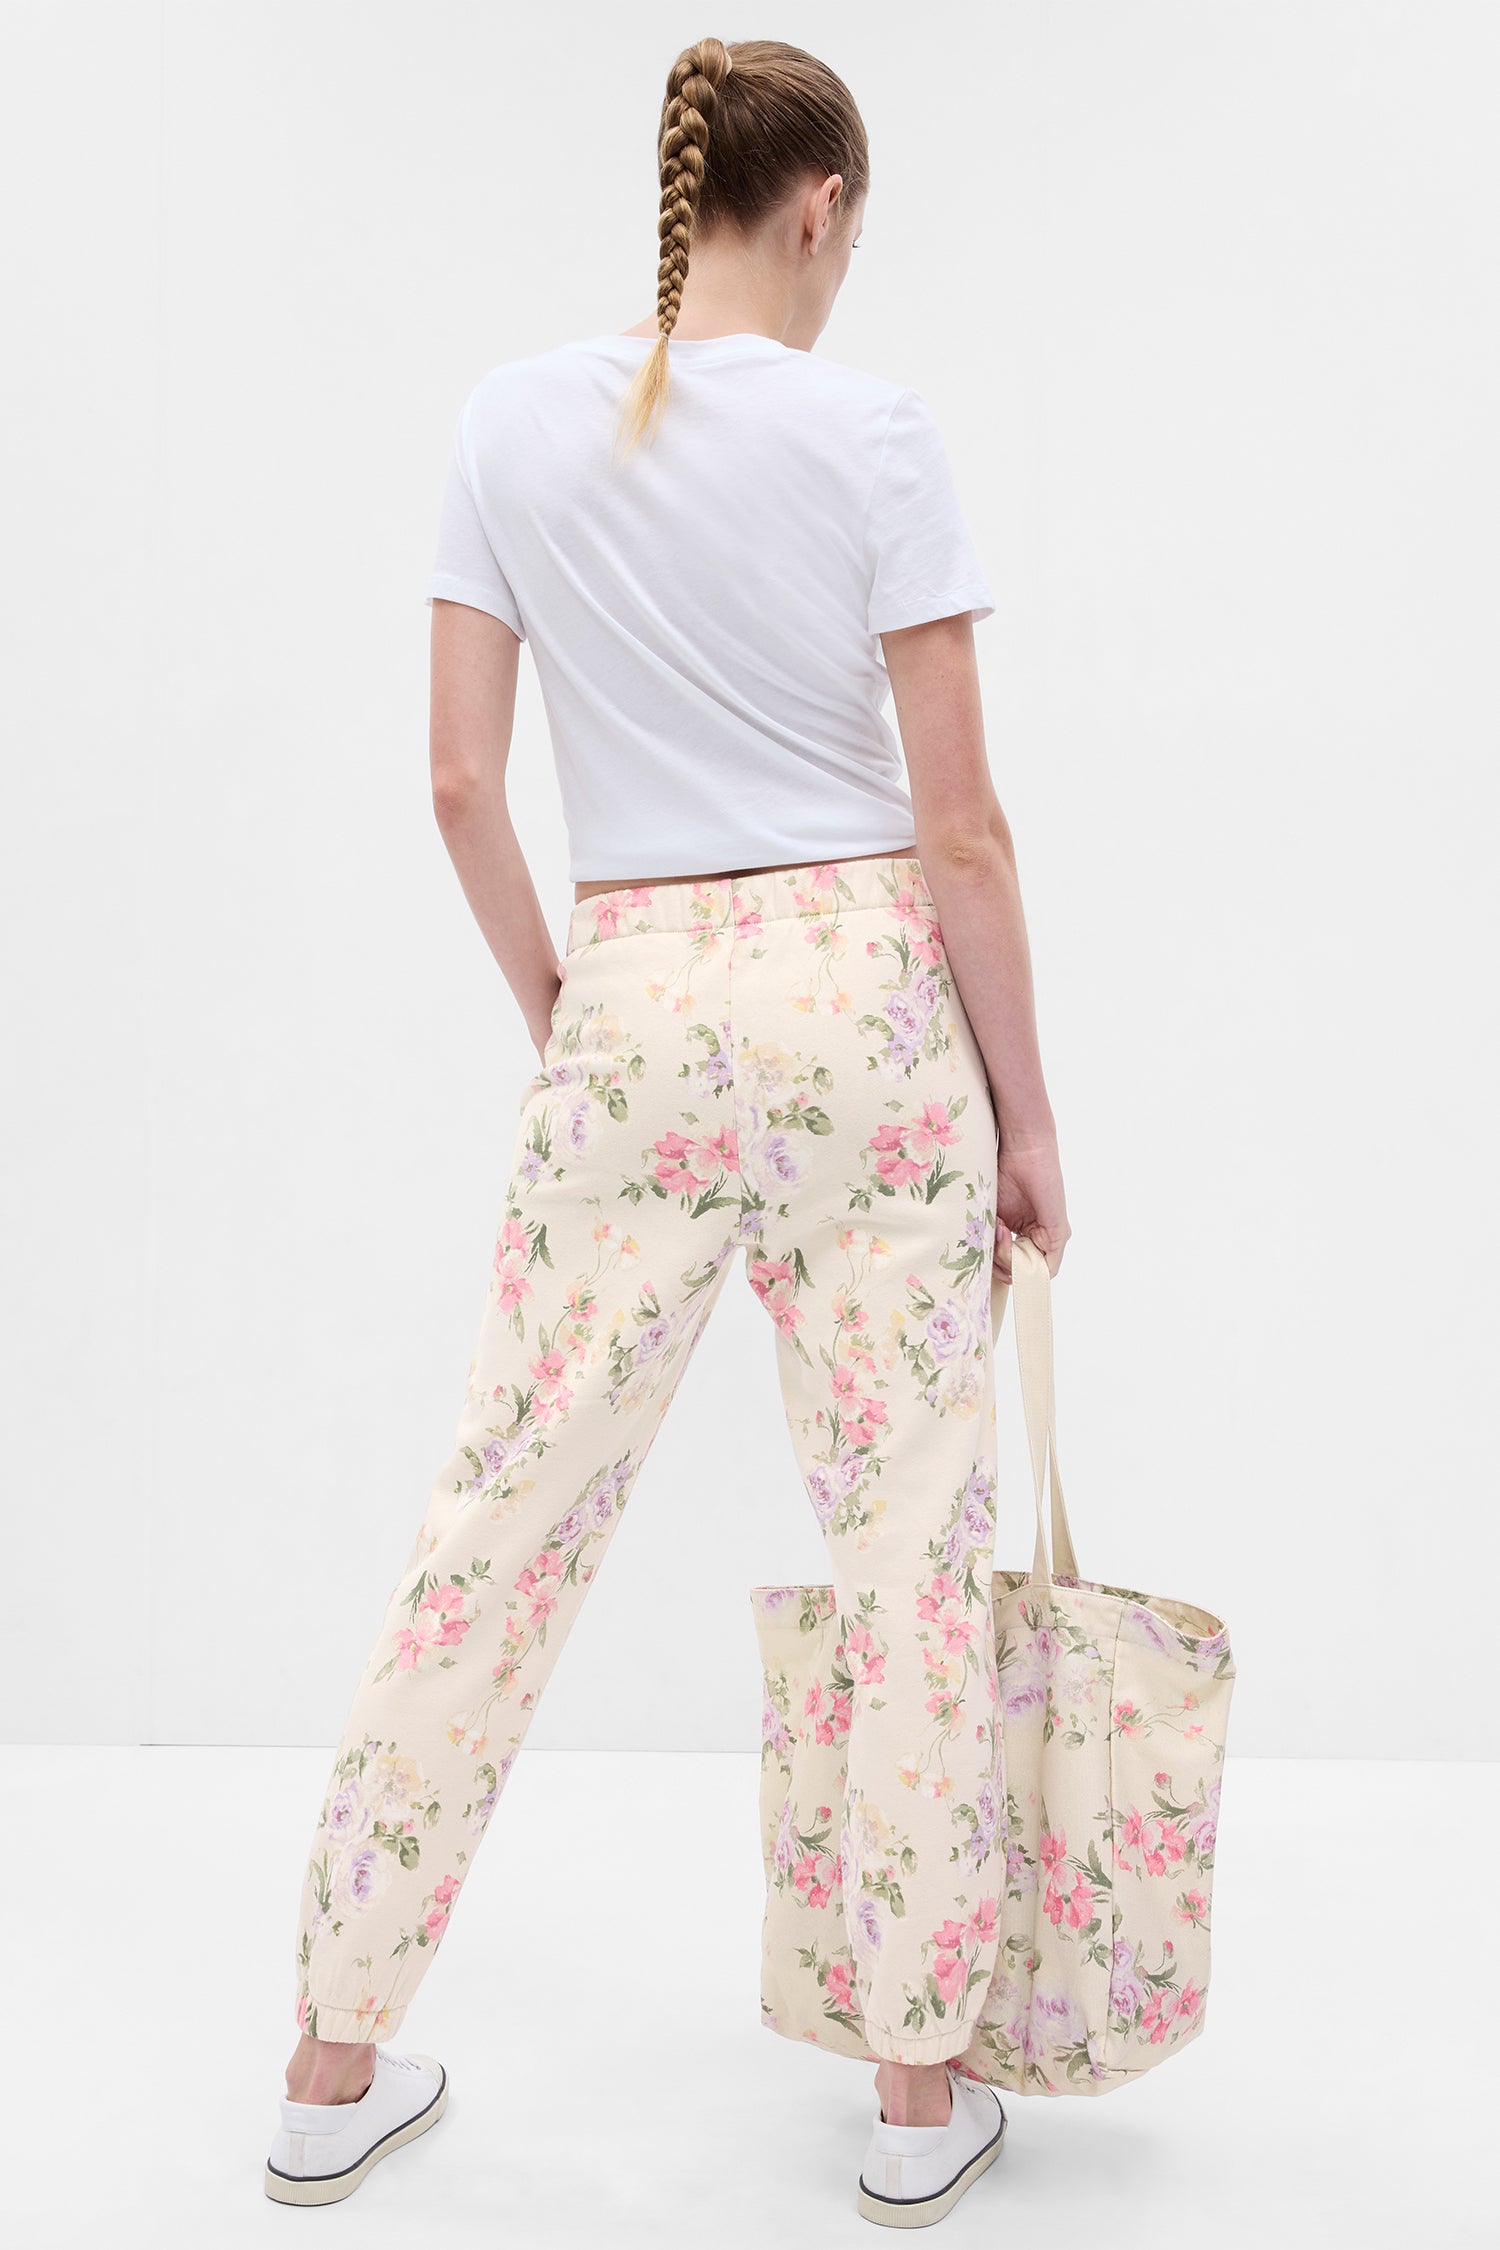 Back image of model wearing cream floral joggers with pink, purple, and green floral print